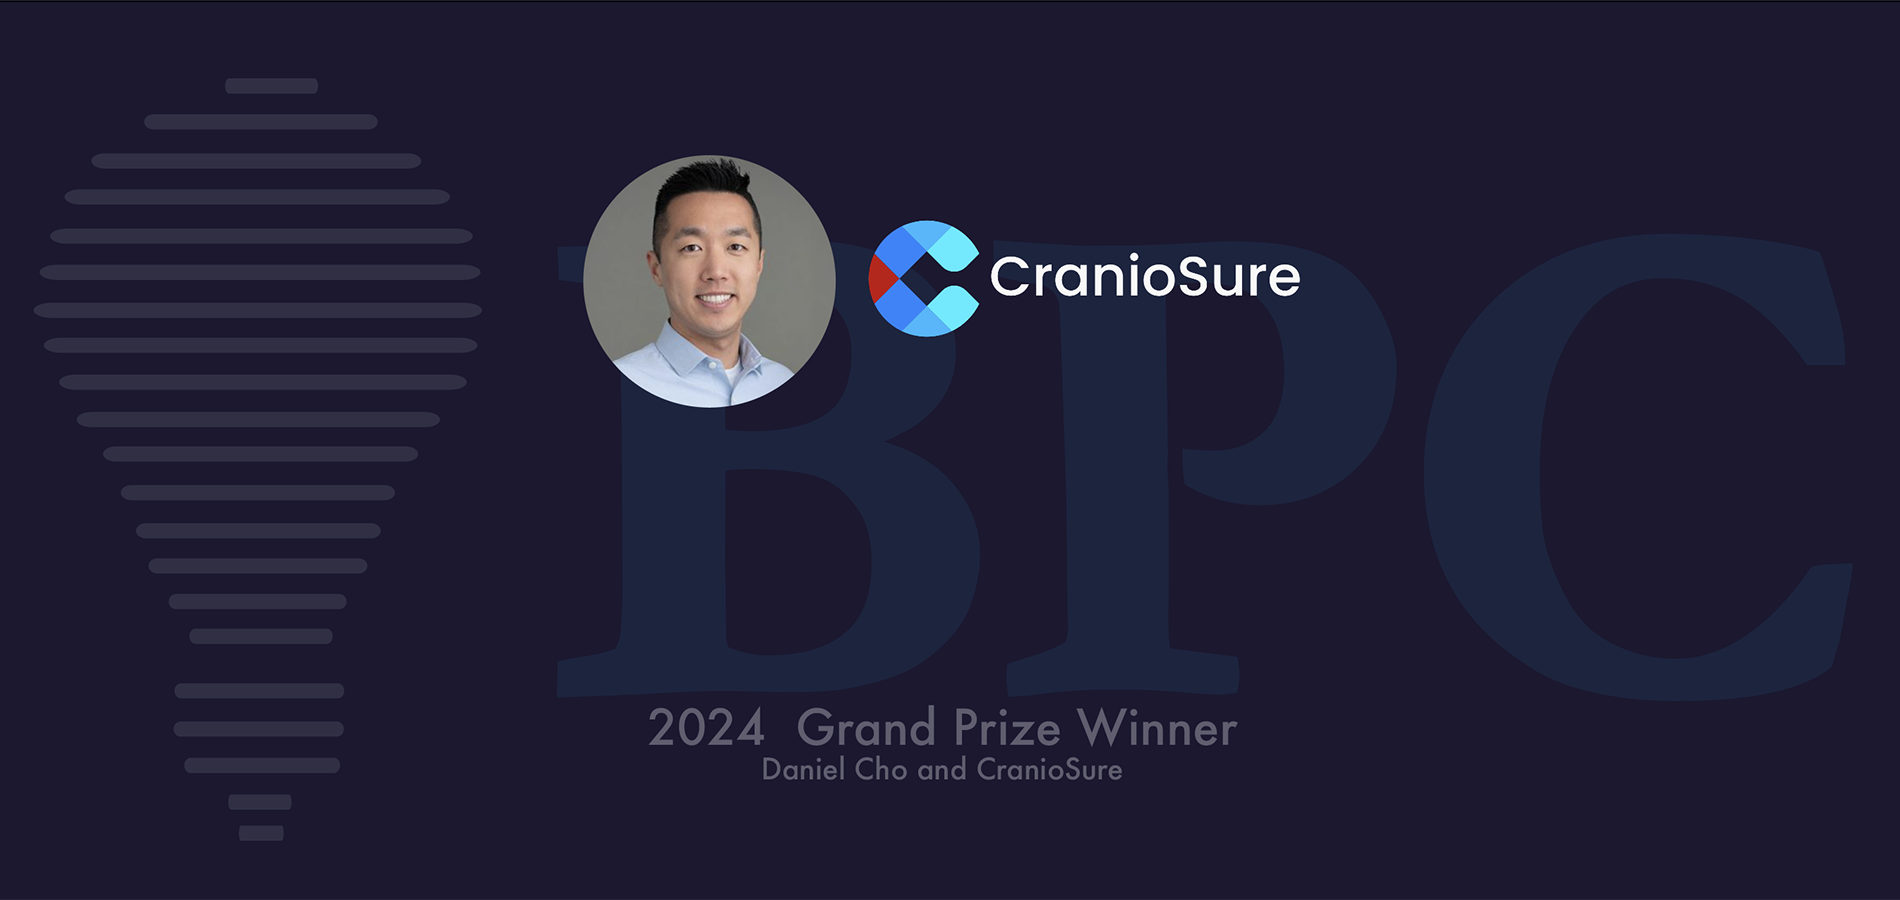 Be the next Grand Prize Winner!